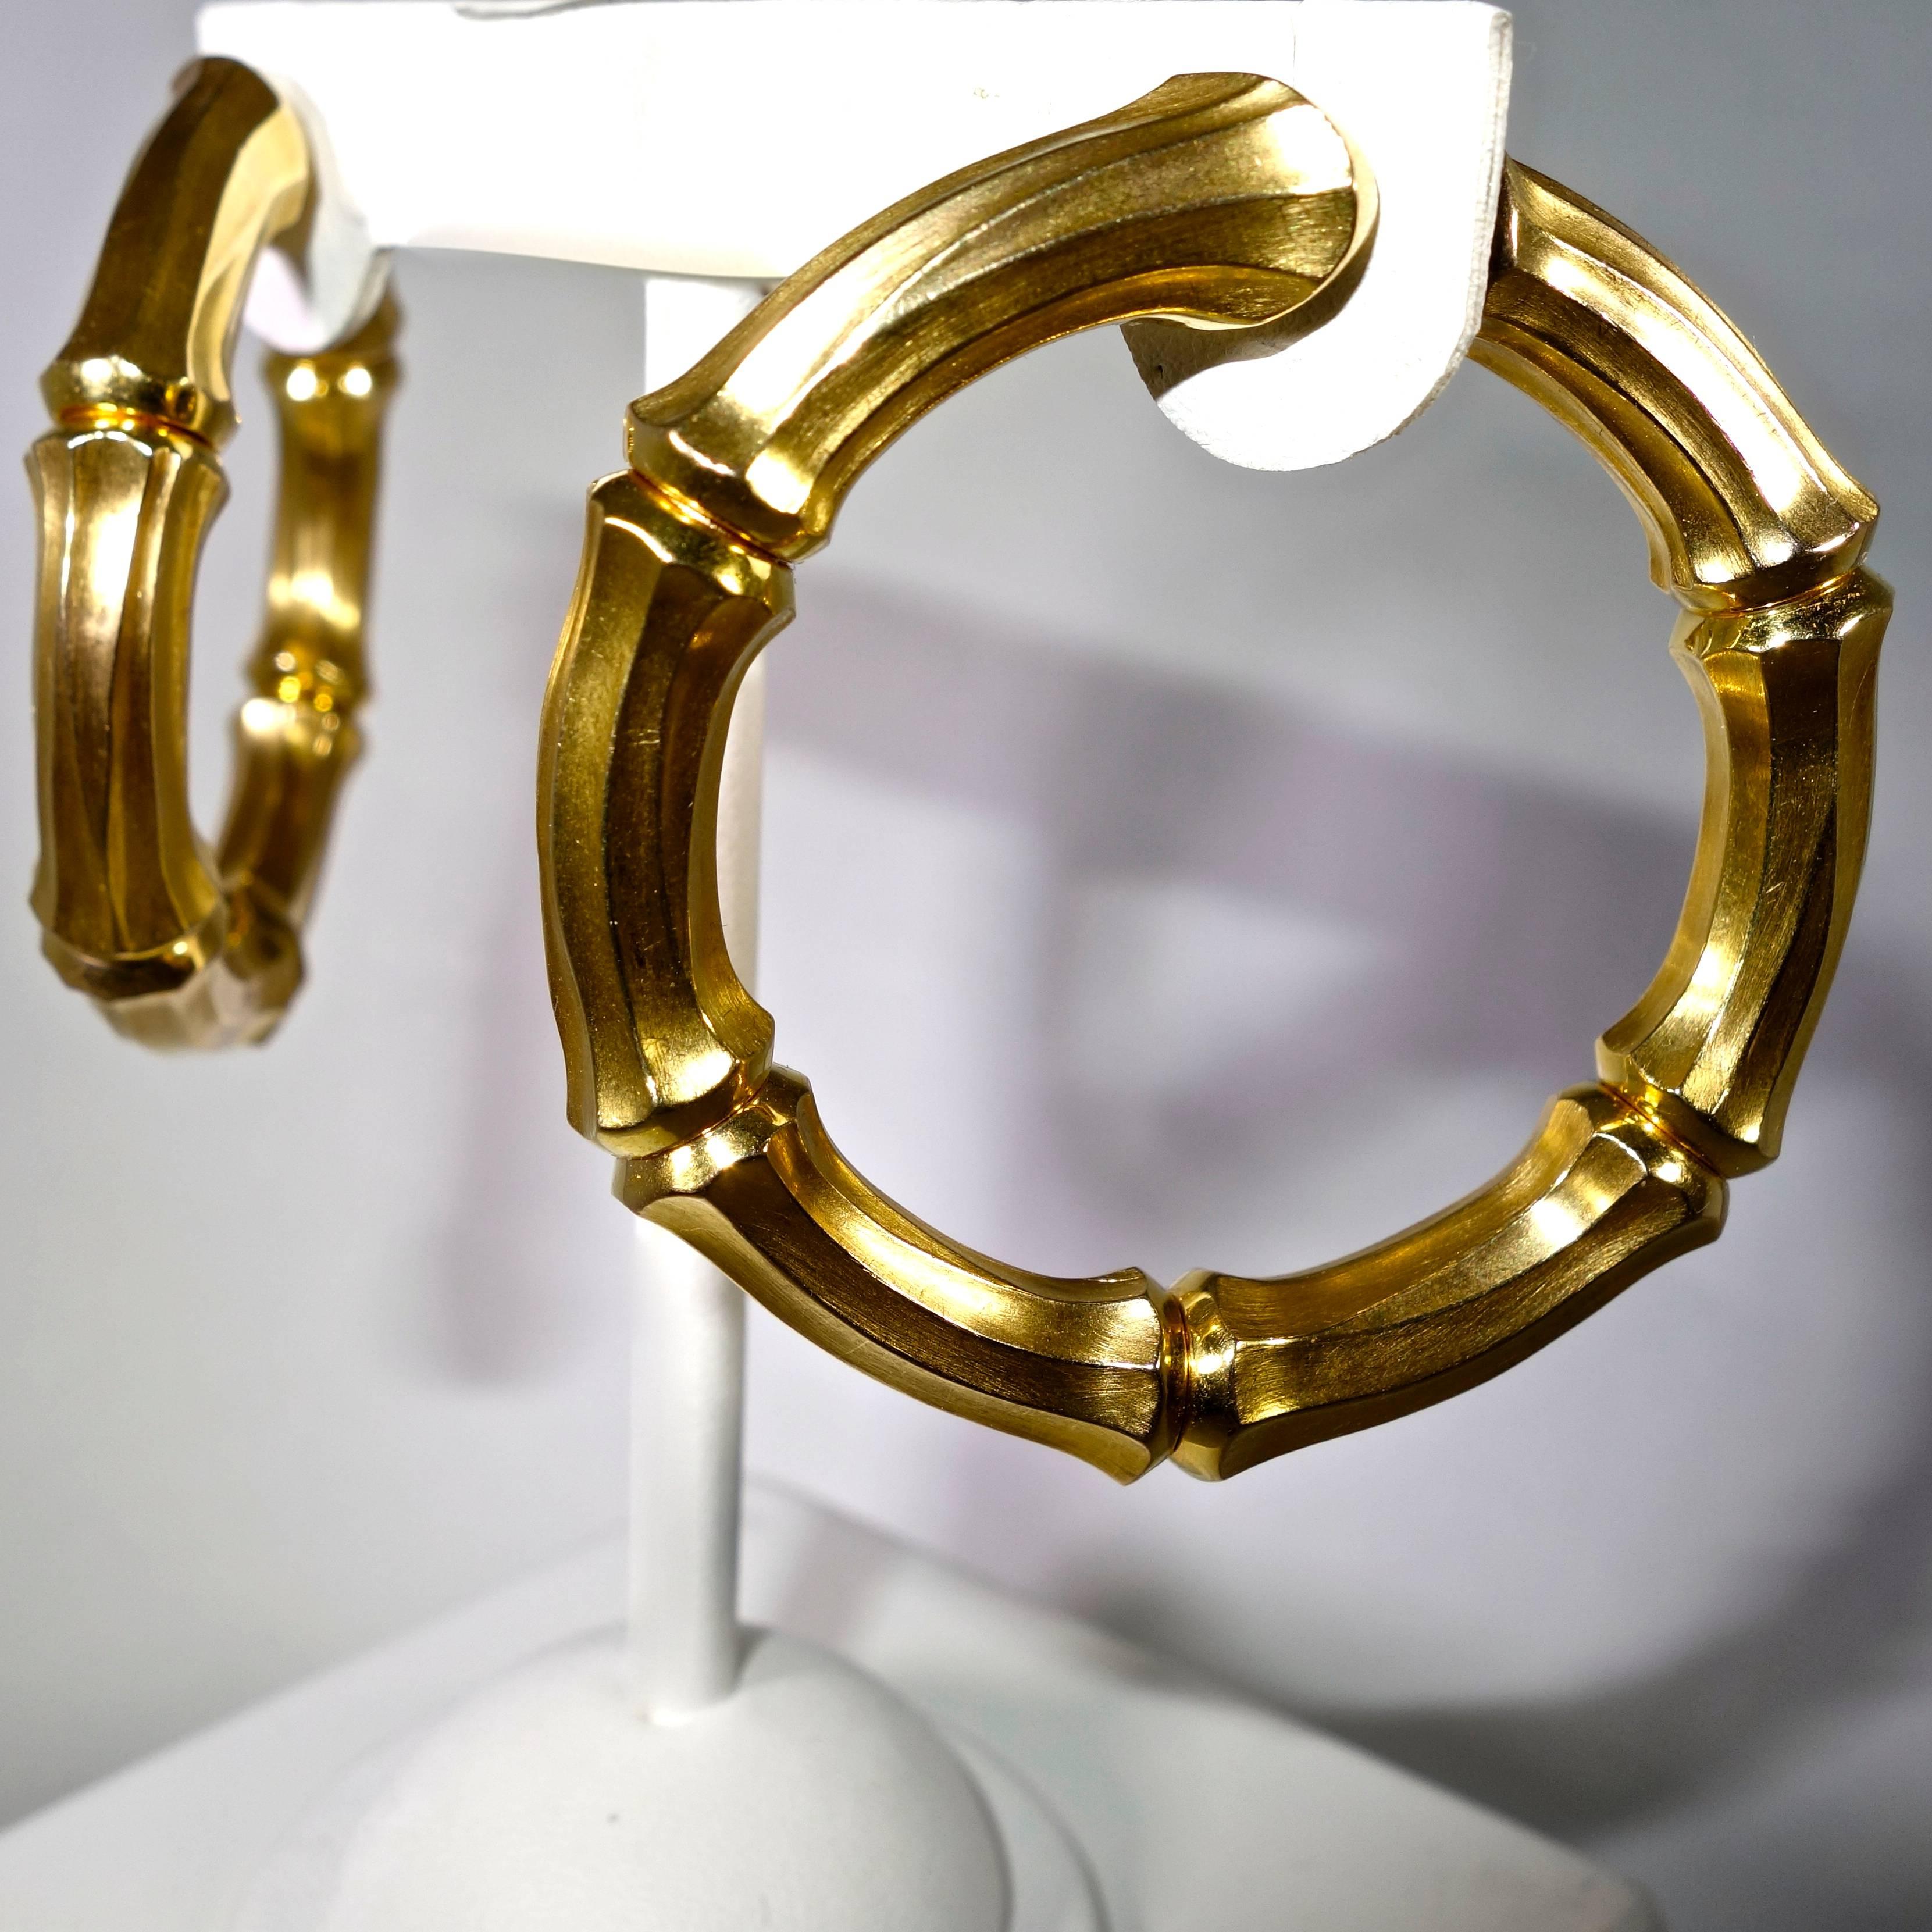 18k yellow gold large hoop earrings.  From the Cartier bamboo motif line, these earrings.  Two inches in diameter.  These striking earrings are signed Cartier, 750 (for 18K) and these pieces are numbered 651893. Theses earrings are accompanied by